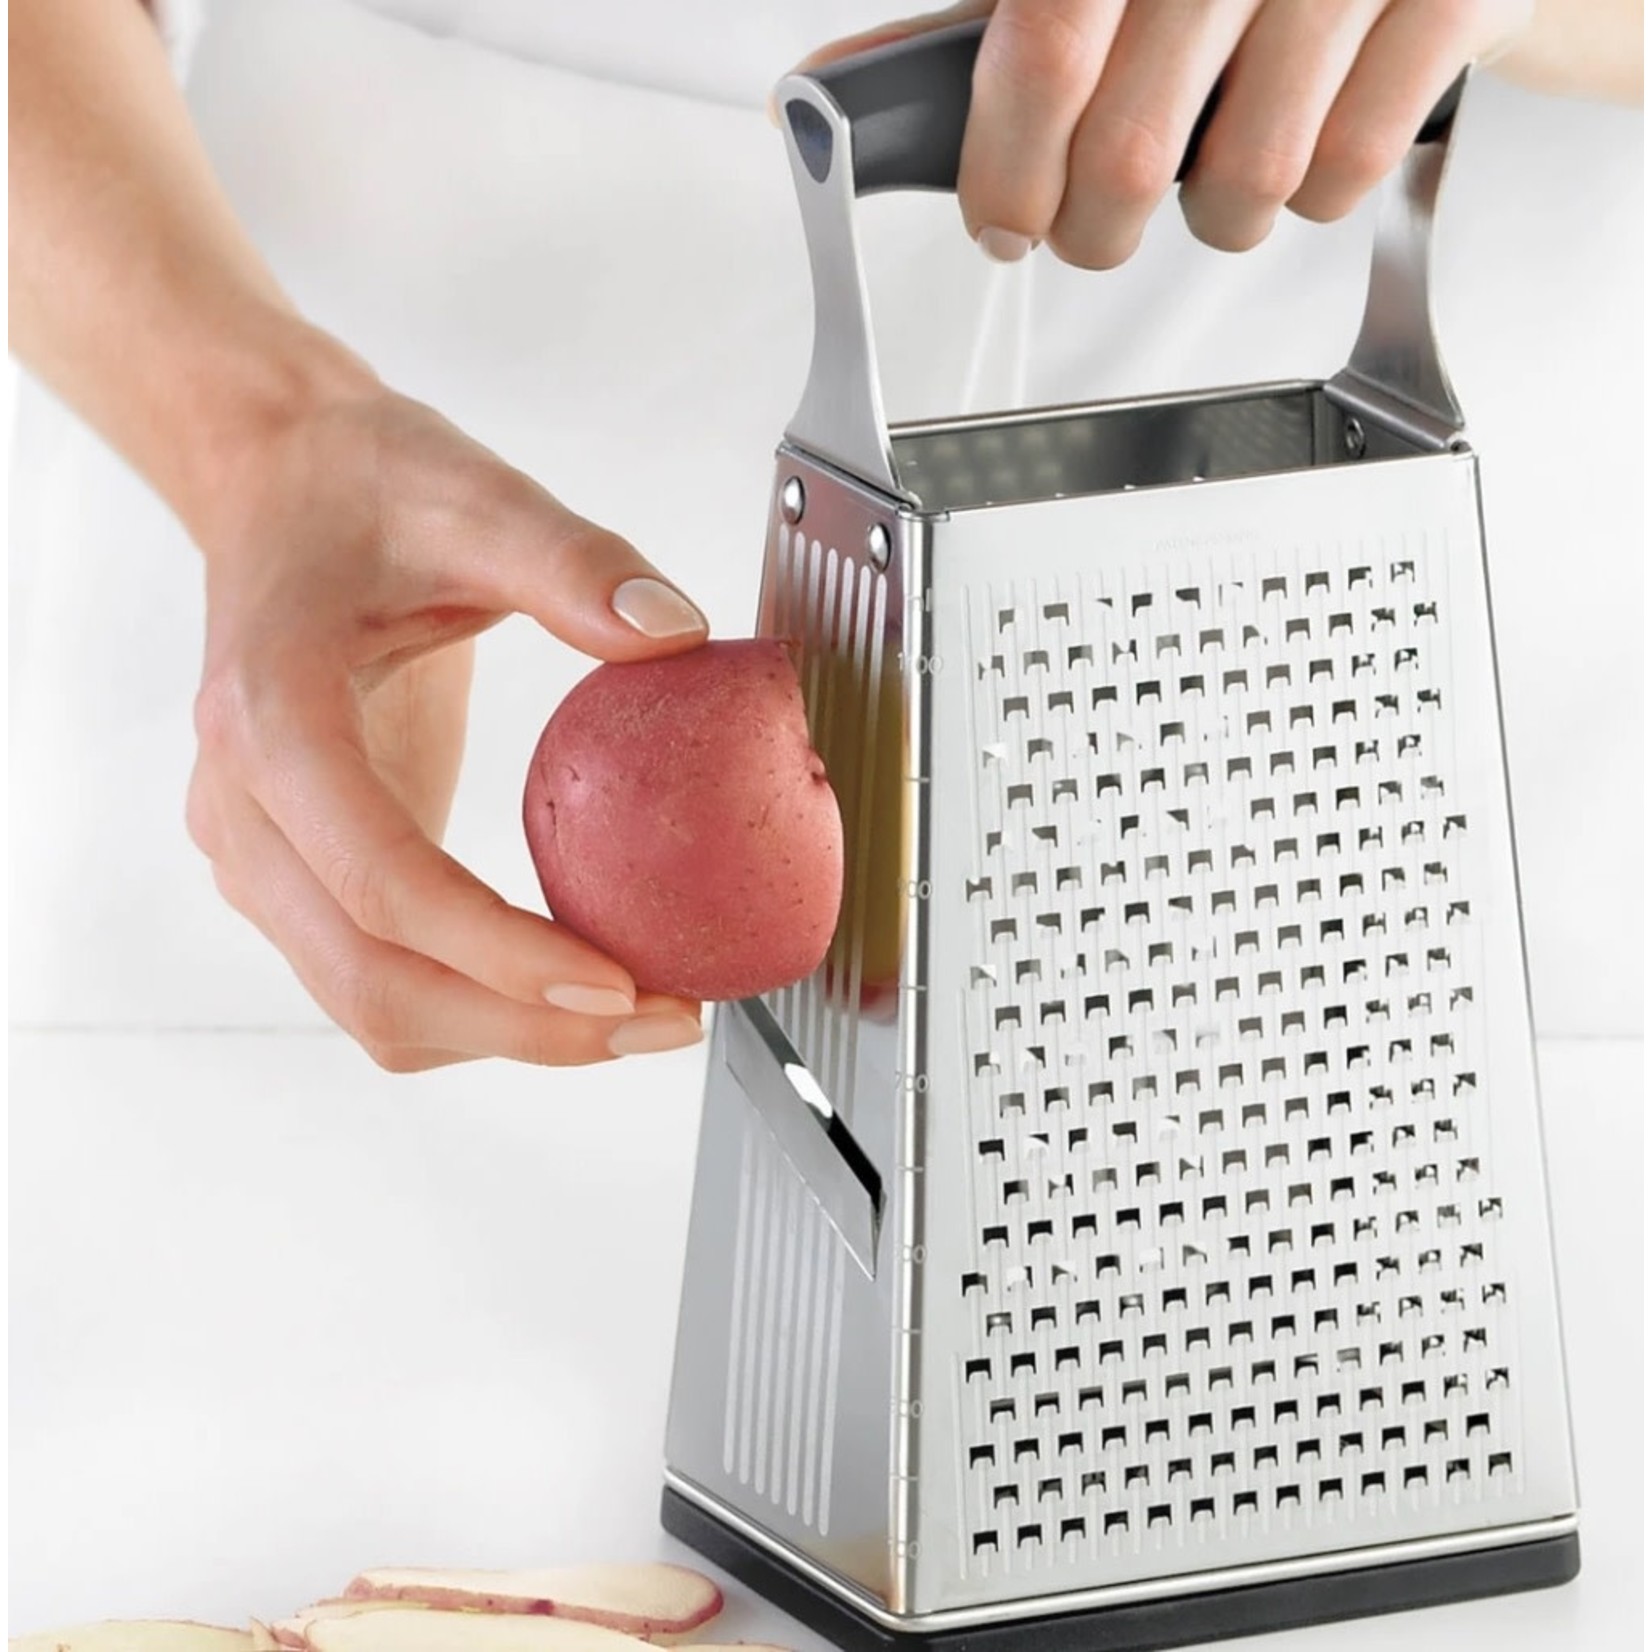 CUISIPRO CUISIPRO 4 Sided Box Grater - Stainless